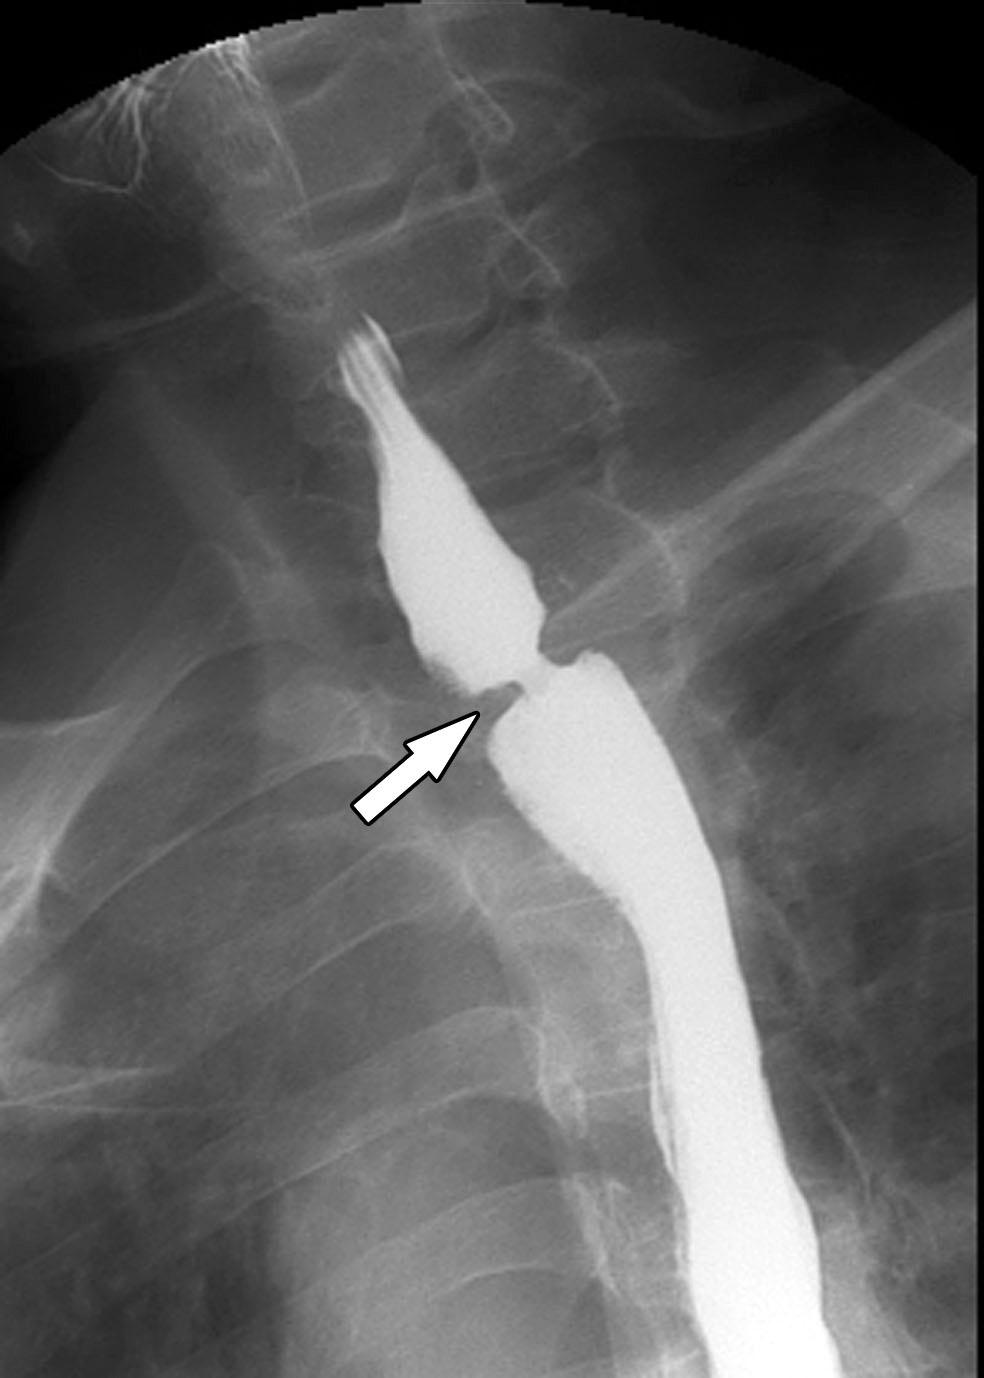 alloon ilatation for enign nastomotic Stricture in UGI Tract Fig. 4. Fluoroscopically guided balloon dilation for anastomotic stricture after Ivor-Lewis surgery.